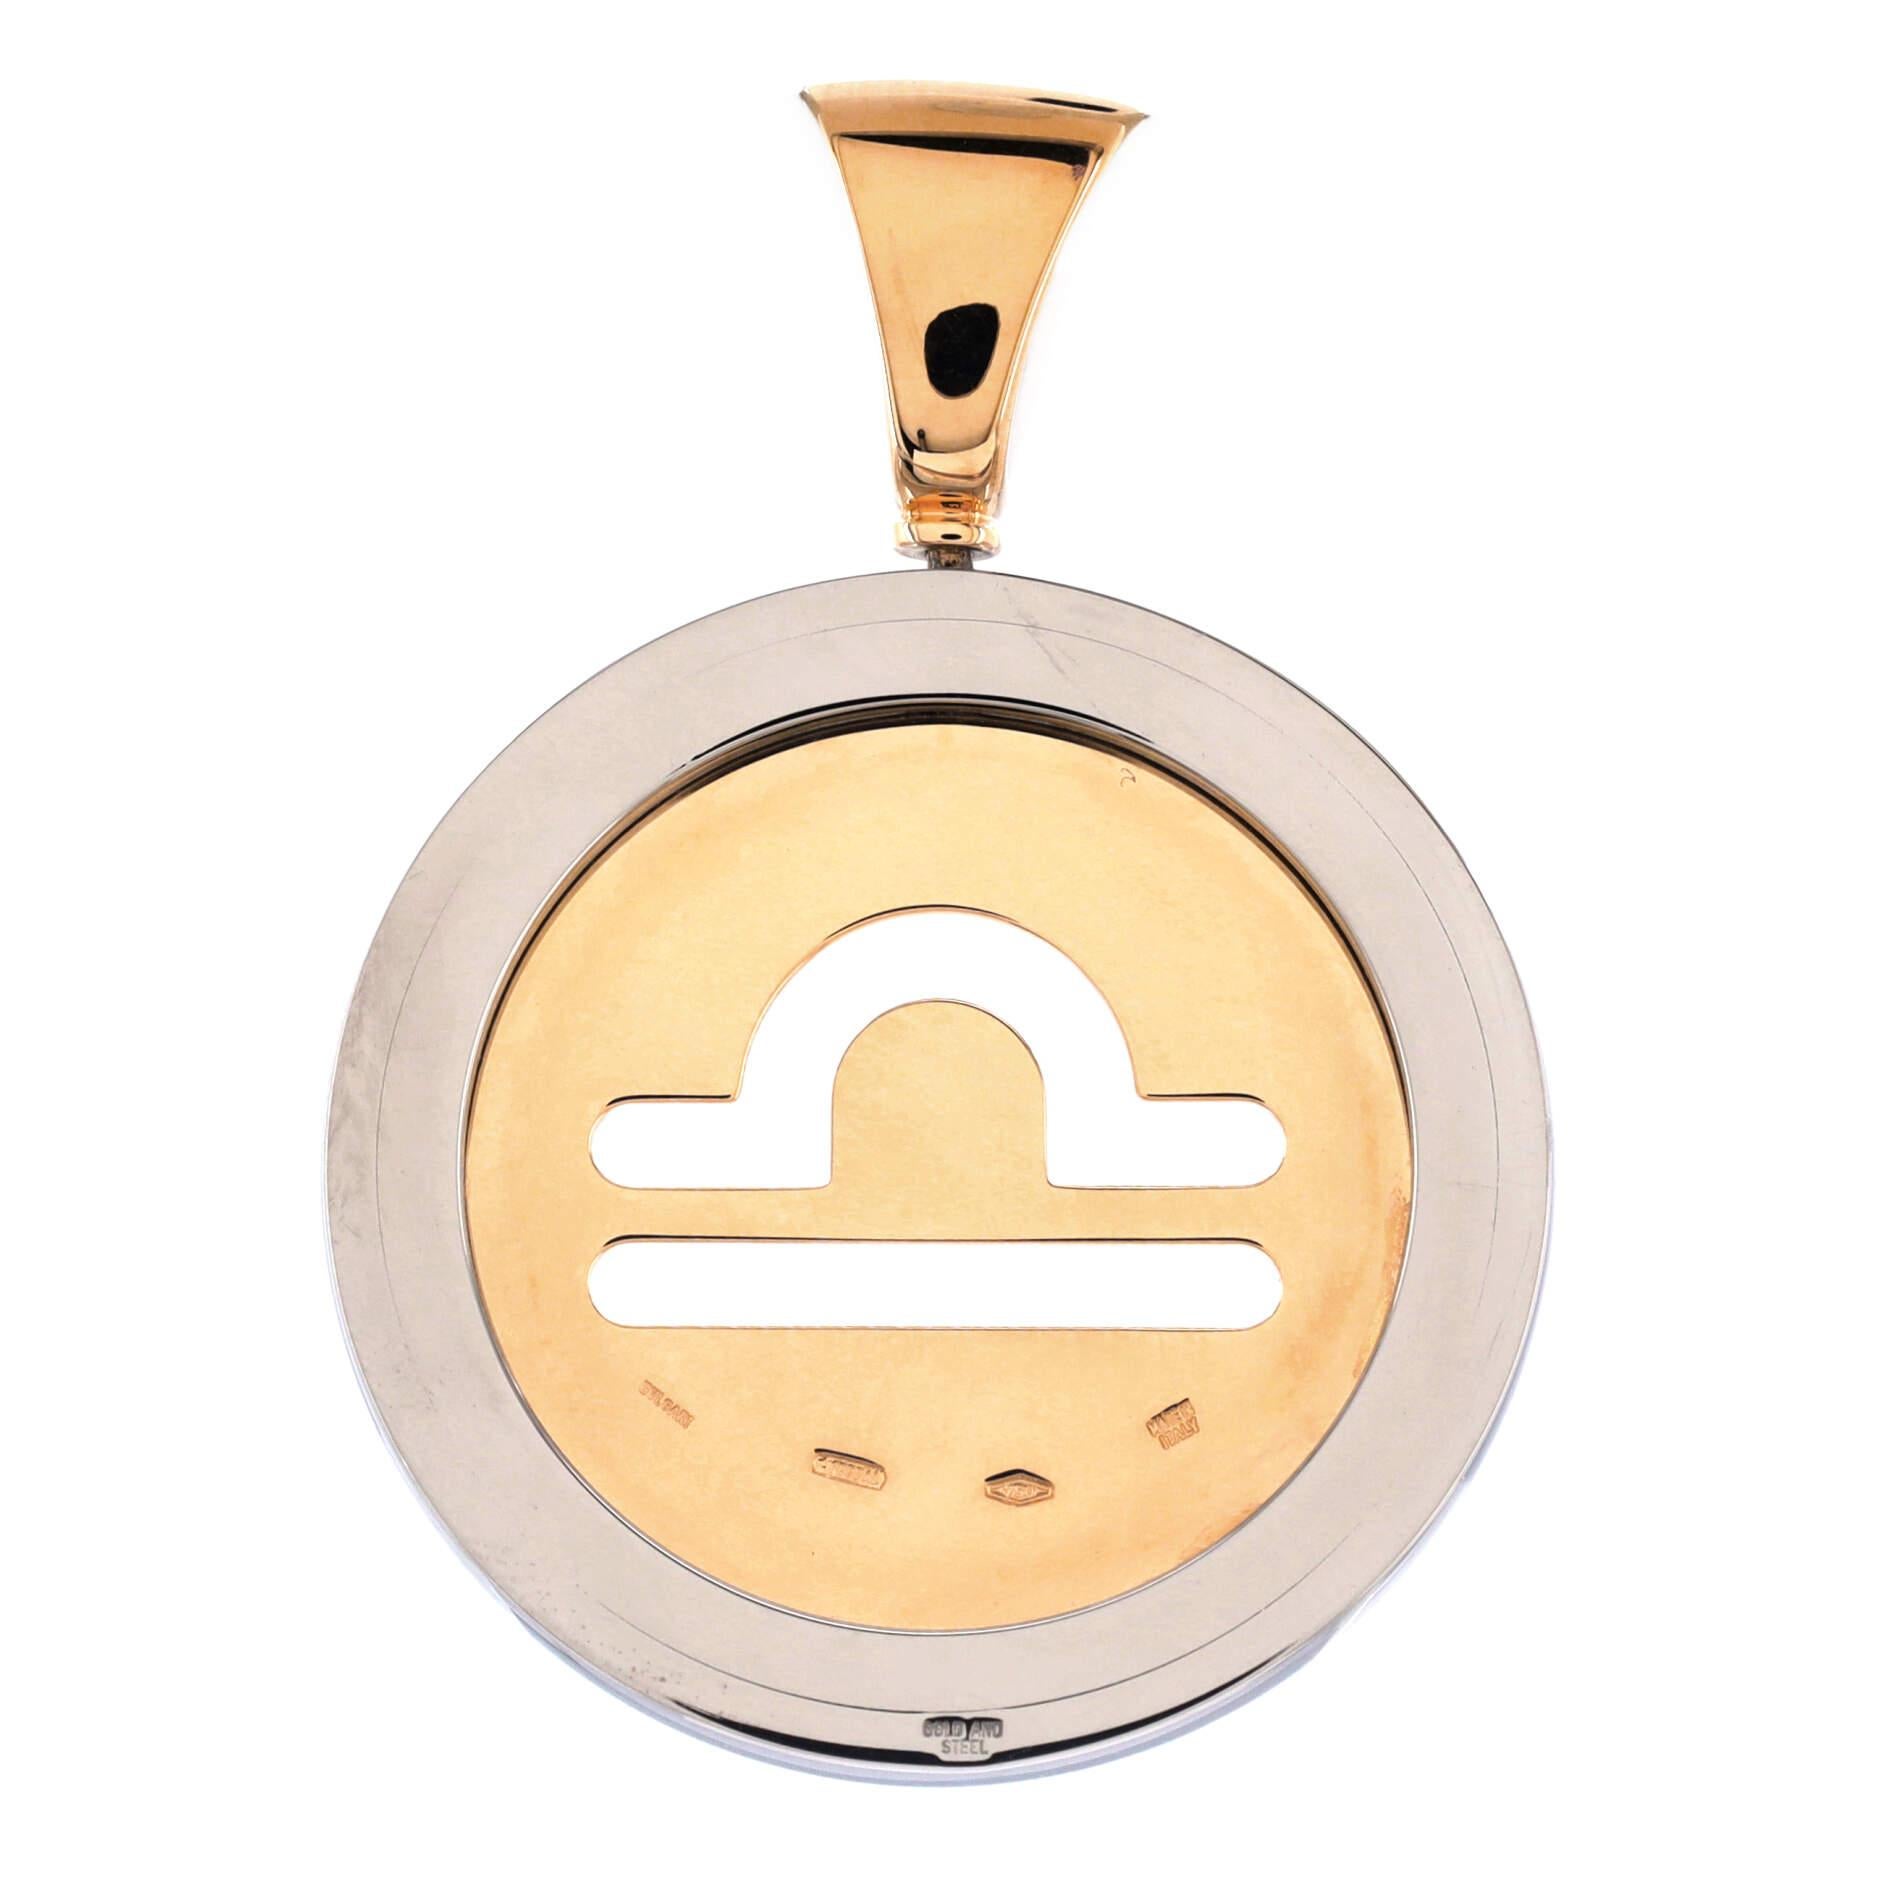 Condition: Great. Minor wear throughout.
Accessories: No Accessories
Measurements: Height/Length: 44.00 mm, Width: 31.30 mm
Designer: Bvlgari
Model: Tondo Zodiac Pendant Charm Pendant & Charms 18K Yellow Gold and Stainless Steel
Exterior Color: